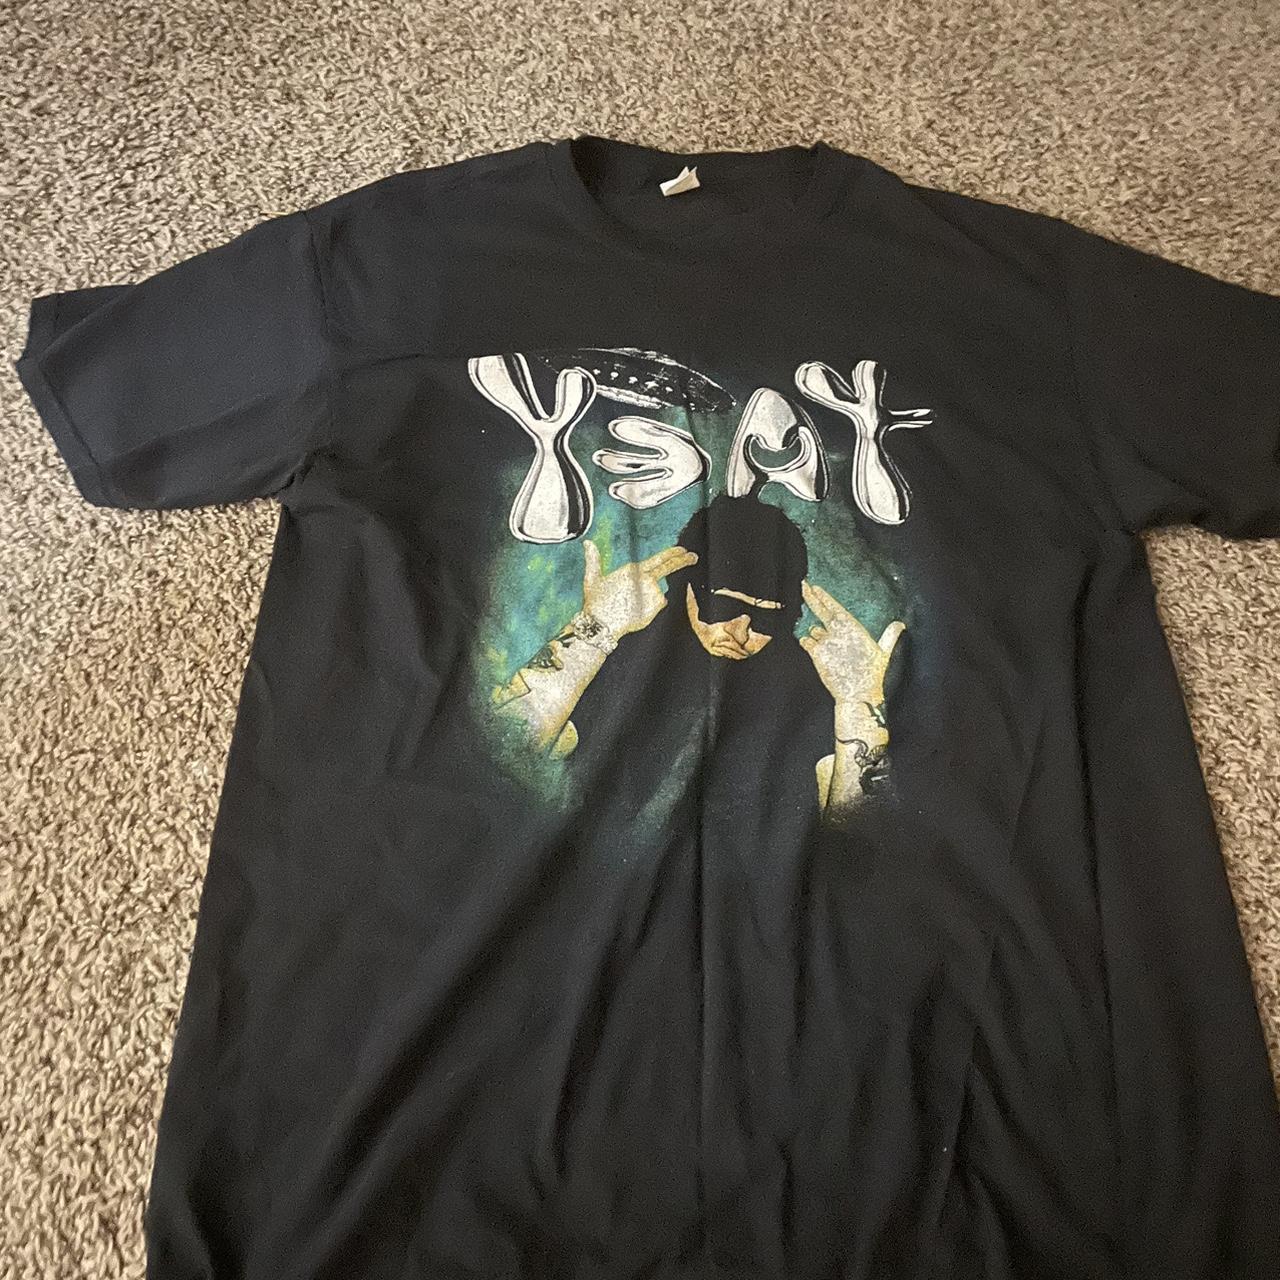 Yeat 2023 concert shirt that I got in Seattle from... Depop